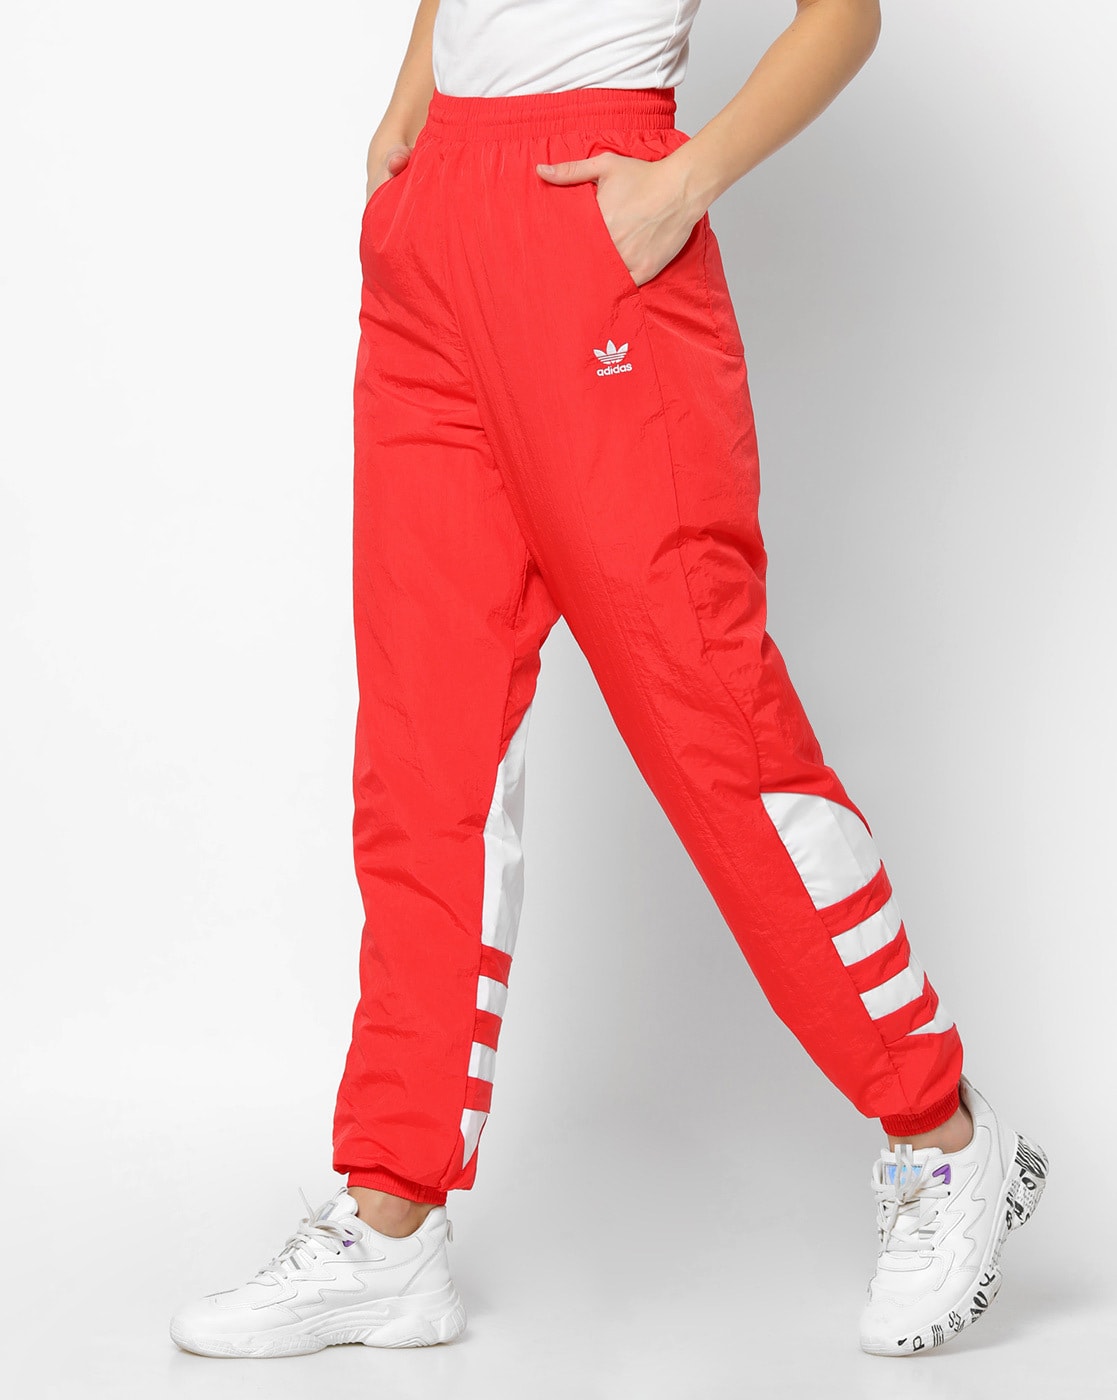 Buy Red Track Pants for Women by Adidas 